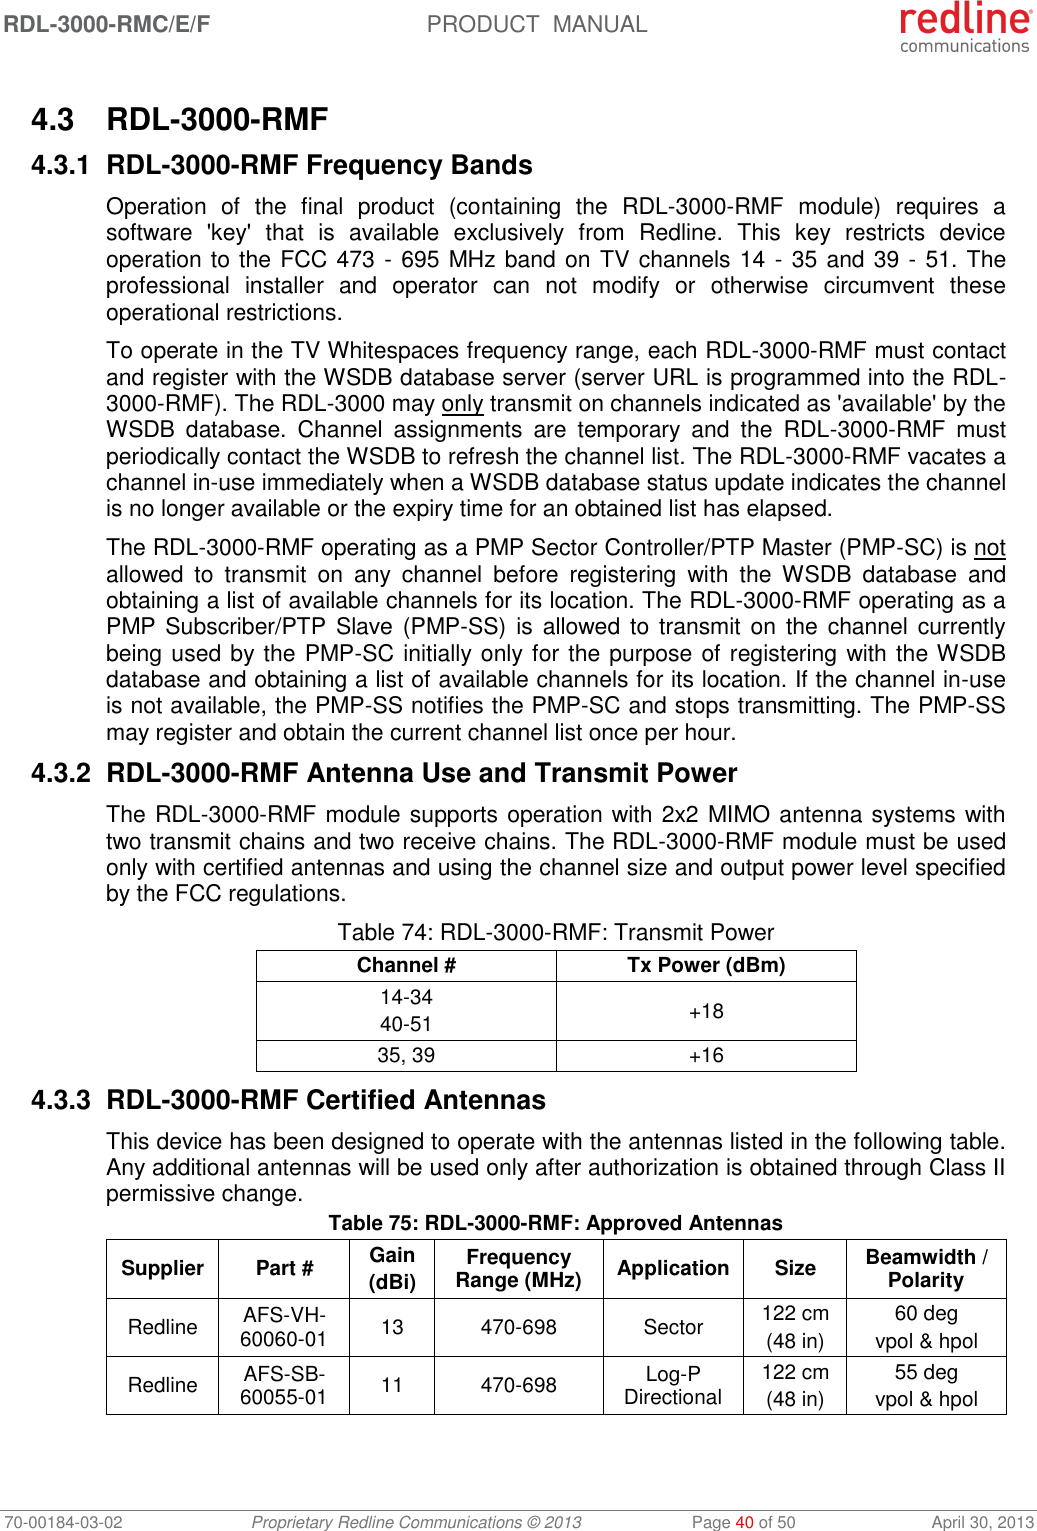 RDL-3000-RMC/E/F  PRODUCT  MANUAL 70-00184-03-02 Proprietary Redline Communications © 2013  Page 40 of 50  April 30, 2013  4.3  RDL-3000-RMF 4.3.1 RDL-3000-RMF Frequency Bands Operation  of  the  final  product  (containing  the  RDL-3000-RMF  module)  requires  a software  &apos;key&apos;  that  is  available  exclusively  from  Redline.  This  key  restricts  device operation to the FCC 473 - 695 MHz band on TV channels 14 - 35 and 39 - 51. The professional  installer  and  operator  can  not  modify  or  otherwise  circumvent  these operational restrictions. To operate in the TV Whitespaces frequency range, each RDL-3000-RMF must contact and register with the WSDB database server (server URL is programmed into the RDL-3000-RMF). The RDL-3000 may only transmit on channels indicated as &apos;available&apos; by the WSDB  database.  Channel  assignments  are  temporary  and  the  RDL-3000-RMF  must periodically contact the WSDB to refresh the channel list. The RDL-3000-RMF vacates a channel in-use immediately when a WSDB database status update indicates the channel is no longer available or the expiry time for an obtained list has elapsed. The RDL-3000-RMF operating as a PMP Sector Controller/PTP Master (PMP-SC) is not allowed  to  transmit  on  any  channel  before  registering  with  the  WSDB  database  and obtaining a list of available channels for its location. The RDL-3000-RMF operating as a PMP Subscriber/PTP  Slave (PMP-SS) is allowed to transmit on  the channel currently being used by the PMP-SC initially only for the purpose of registering with the WSDB database and obtaining a list of available channels for its location. If the channel in-use is not available, the PMP-SS notifies the PMP-SC and stops transmitting. The PMP-SS may register and obtain the current channel list once per hour. 4.3.2 RDL-3000-RMF Antenna Use and Transmit Power The RDL-3000-RMF module supports operation with 2x2 MIMO antenna systems with two transmit chains and two receive chains. The RDL-3000-RMF module must be used only with certified antennas and using the channel size and output power level specified by the FCC regulations. Table 74: RDL-3000-RMF: Transmit Power Channel # Tx Power (dBm) 14-34 40-51 +18 35, 39 +16 4.3.3 RDL-3000-RMF Certified Antennas This device has been designed to operate with the antennas listed in the following table. Any additional antennas will be used only after authorization is obtained through Class II permissive change. Table 75: RDL-3000-RMF: Approved Antennas Supplier Part # Gain (dBi) Frequency Range (MHz) Application Size Beamwidth / Polarity Redline AFS-VH-60060-01 13 470-698 Sector 122 cm (48 in) 60 deg vpol &amp; hpol Redline AFS-SB-60055-01 11 470-698 Log-P Directional 122 cm (48 in) 55 deg vpol &amp; hpol   